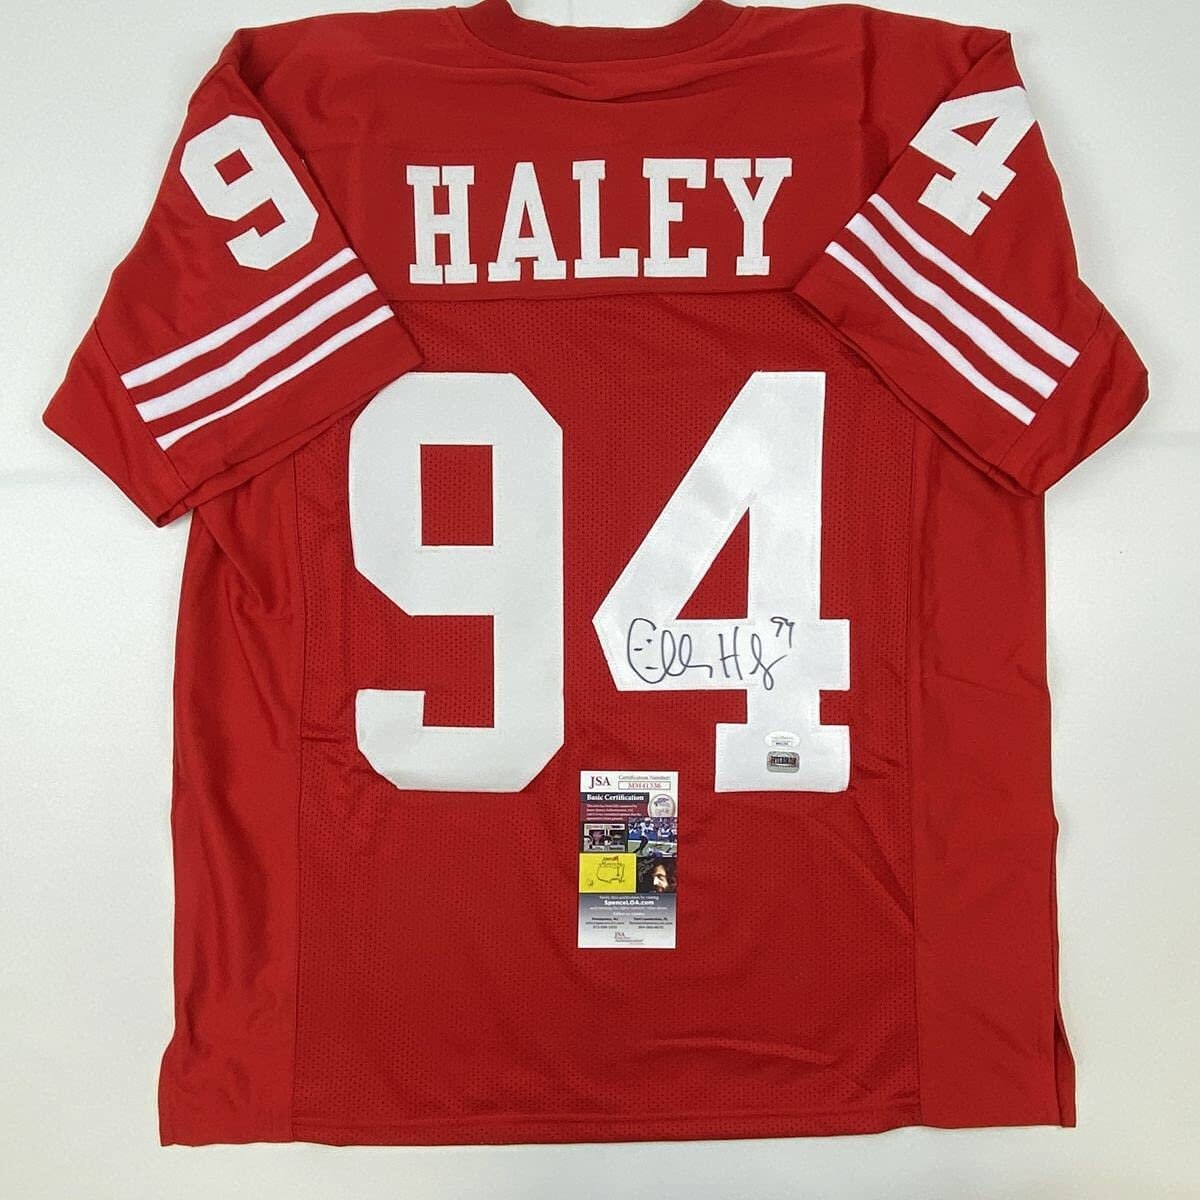 Charles Haley Autographed Memorabilia  Signed Photo, Jersey, Collectibles  & Merchandise